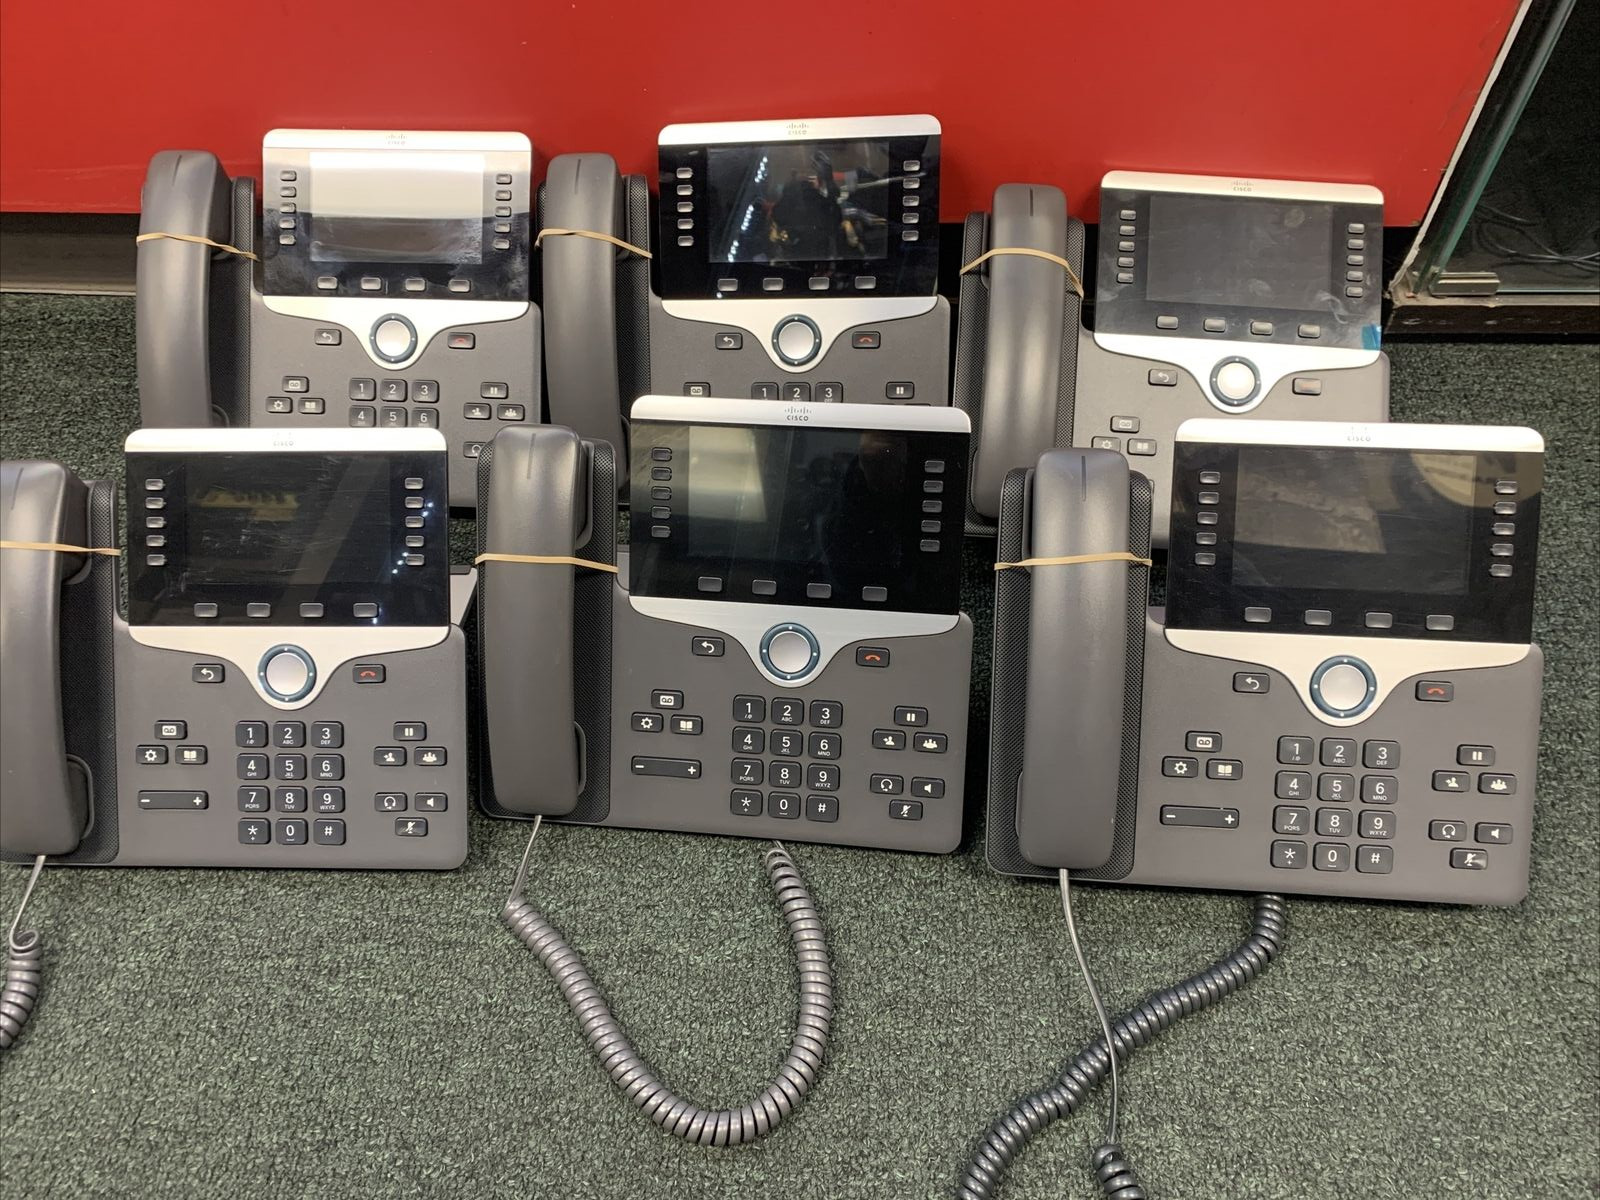 Lot of 6 Cisco CP-8811-K9 8811 VoIP 5 Line Business Conference Phone SEE DESCRIP